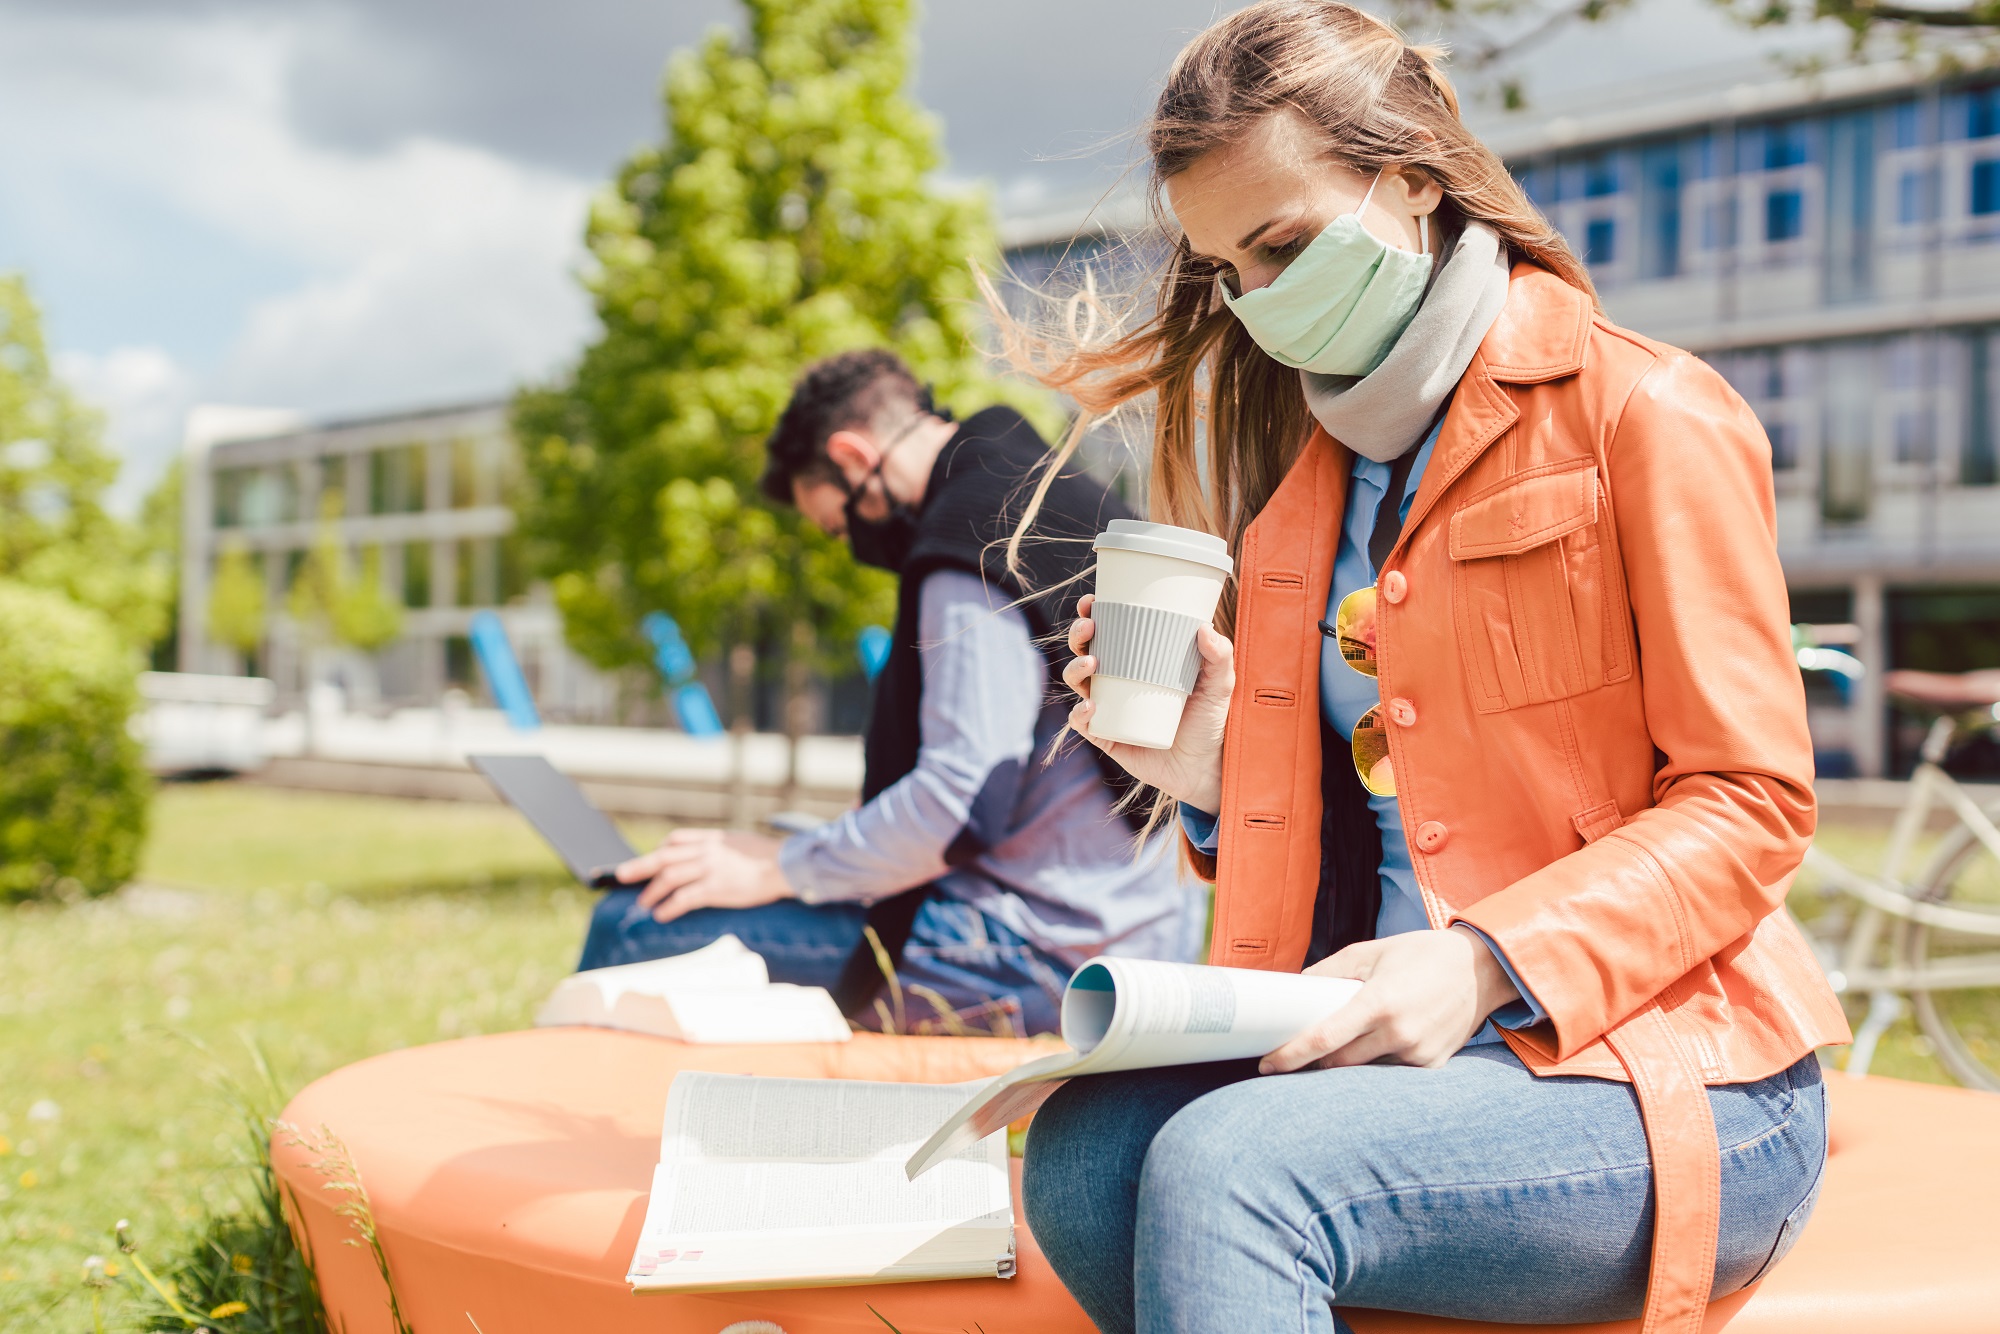 Man and woman student on college campus. Sitting on bench outside, wearing face masks and working on laptops